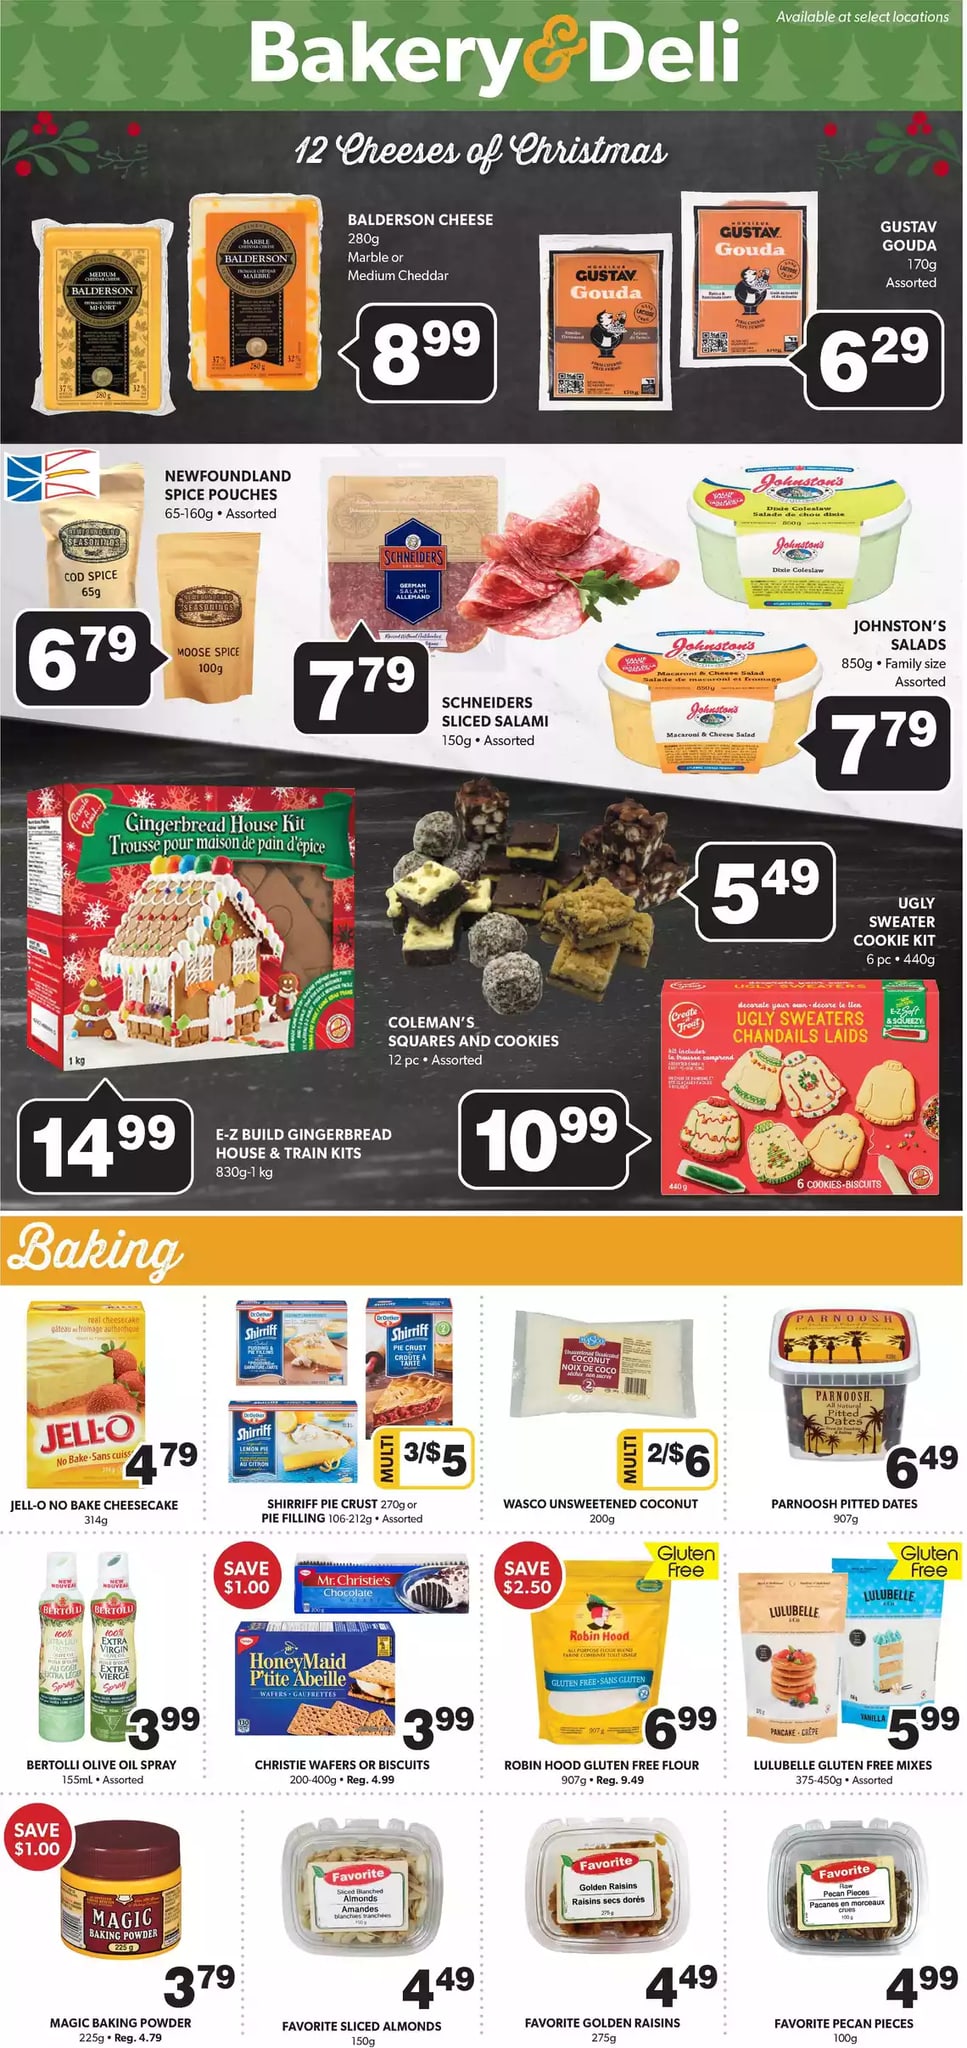 Colemans - Weekly Flyer Specials - Page 5